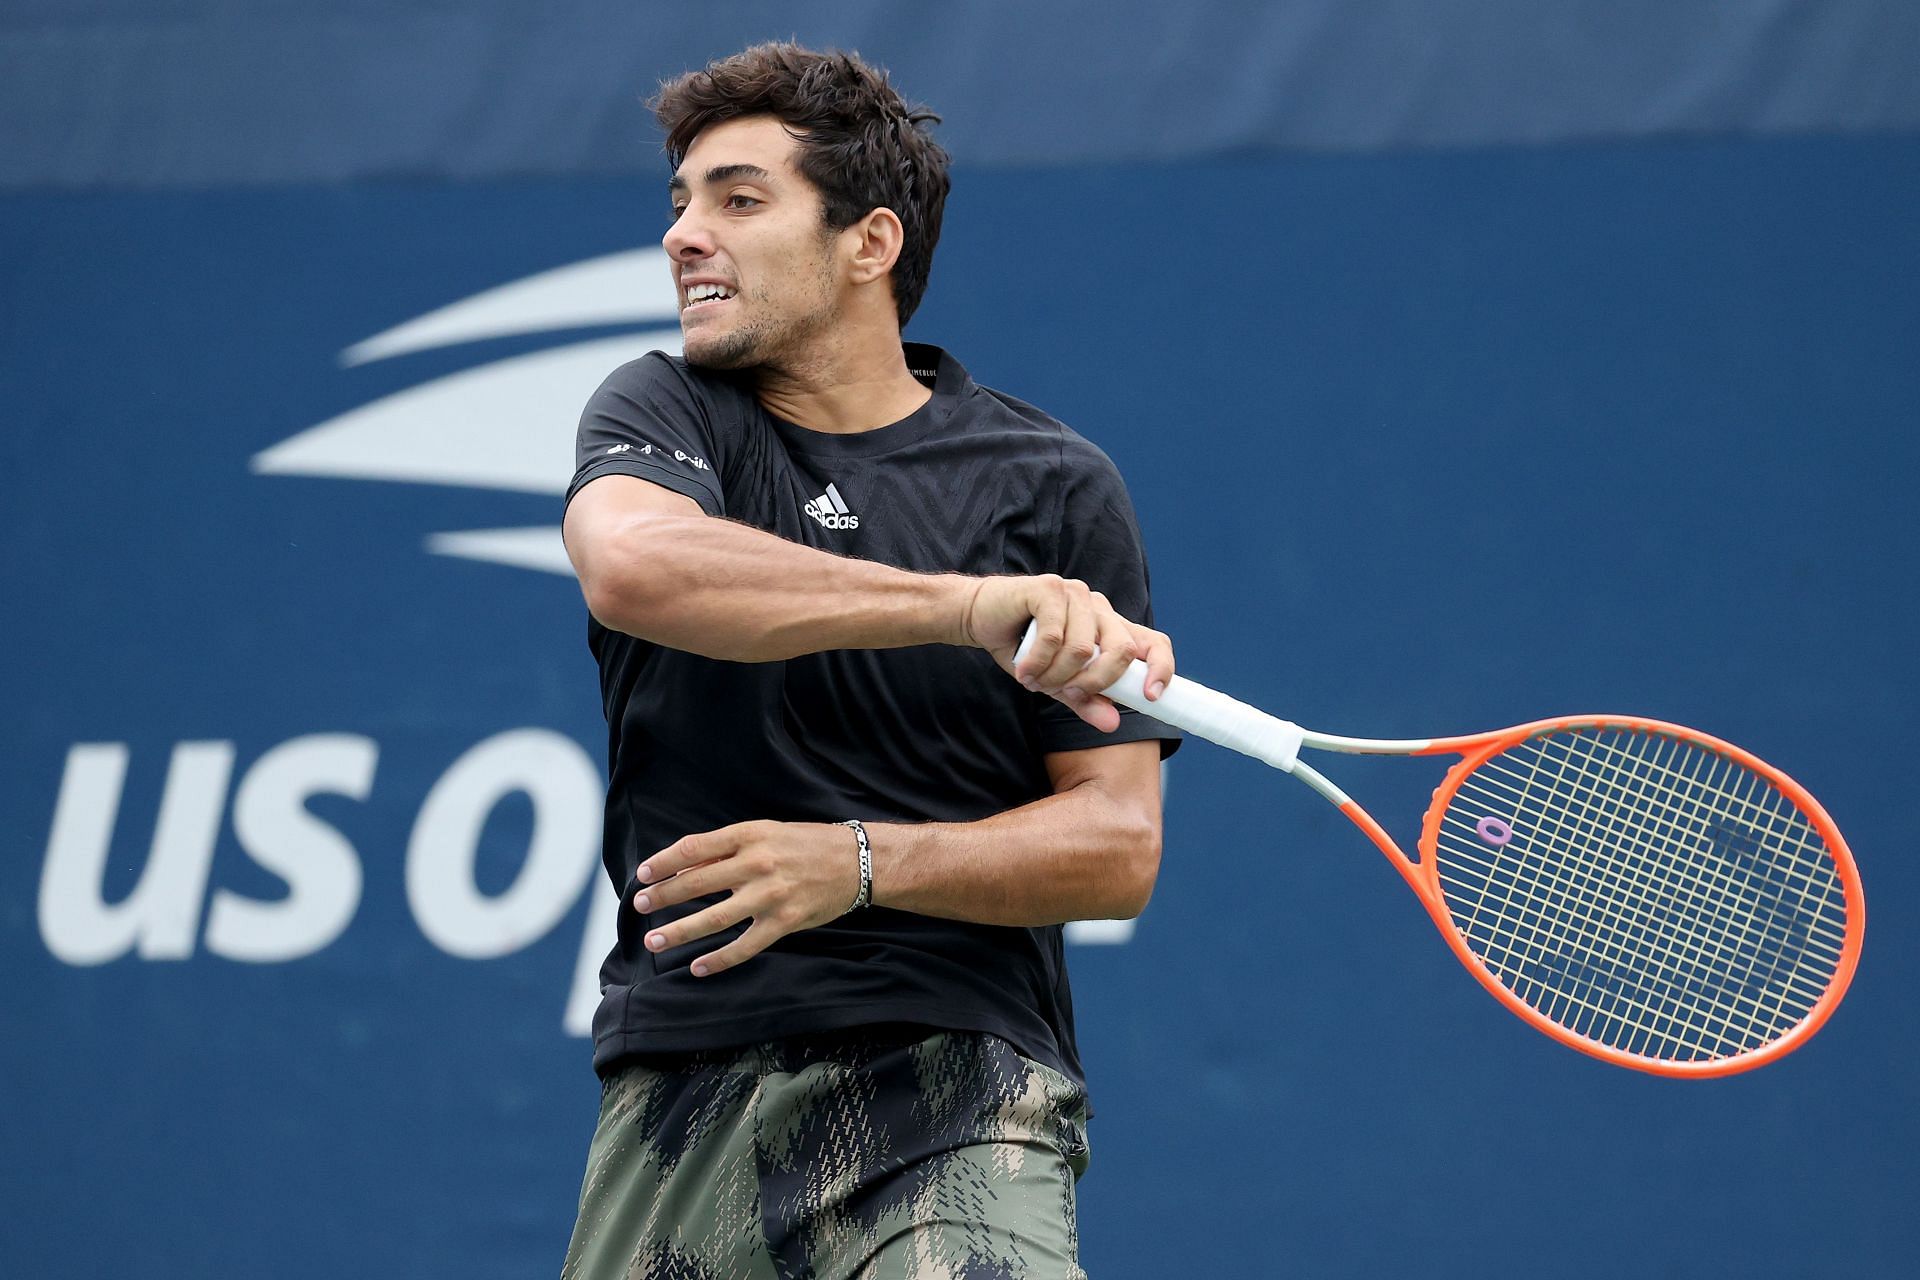 The Chilean at the 2021 US Open